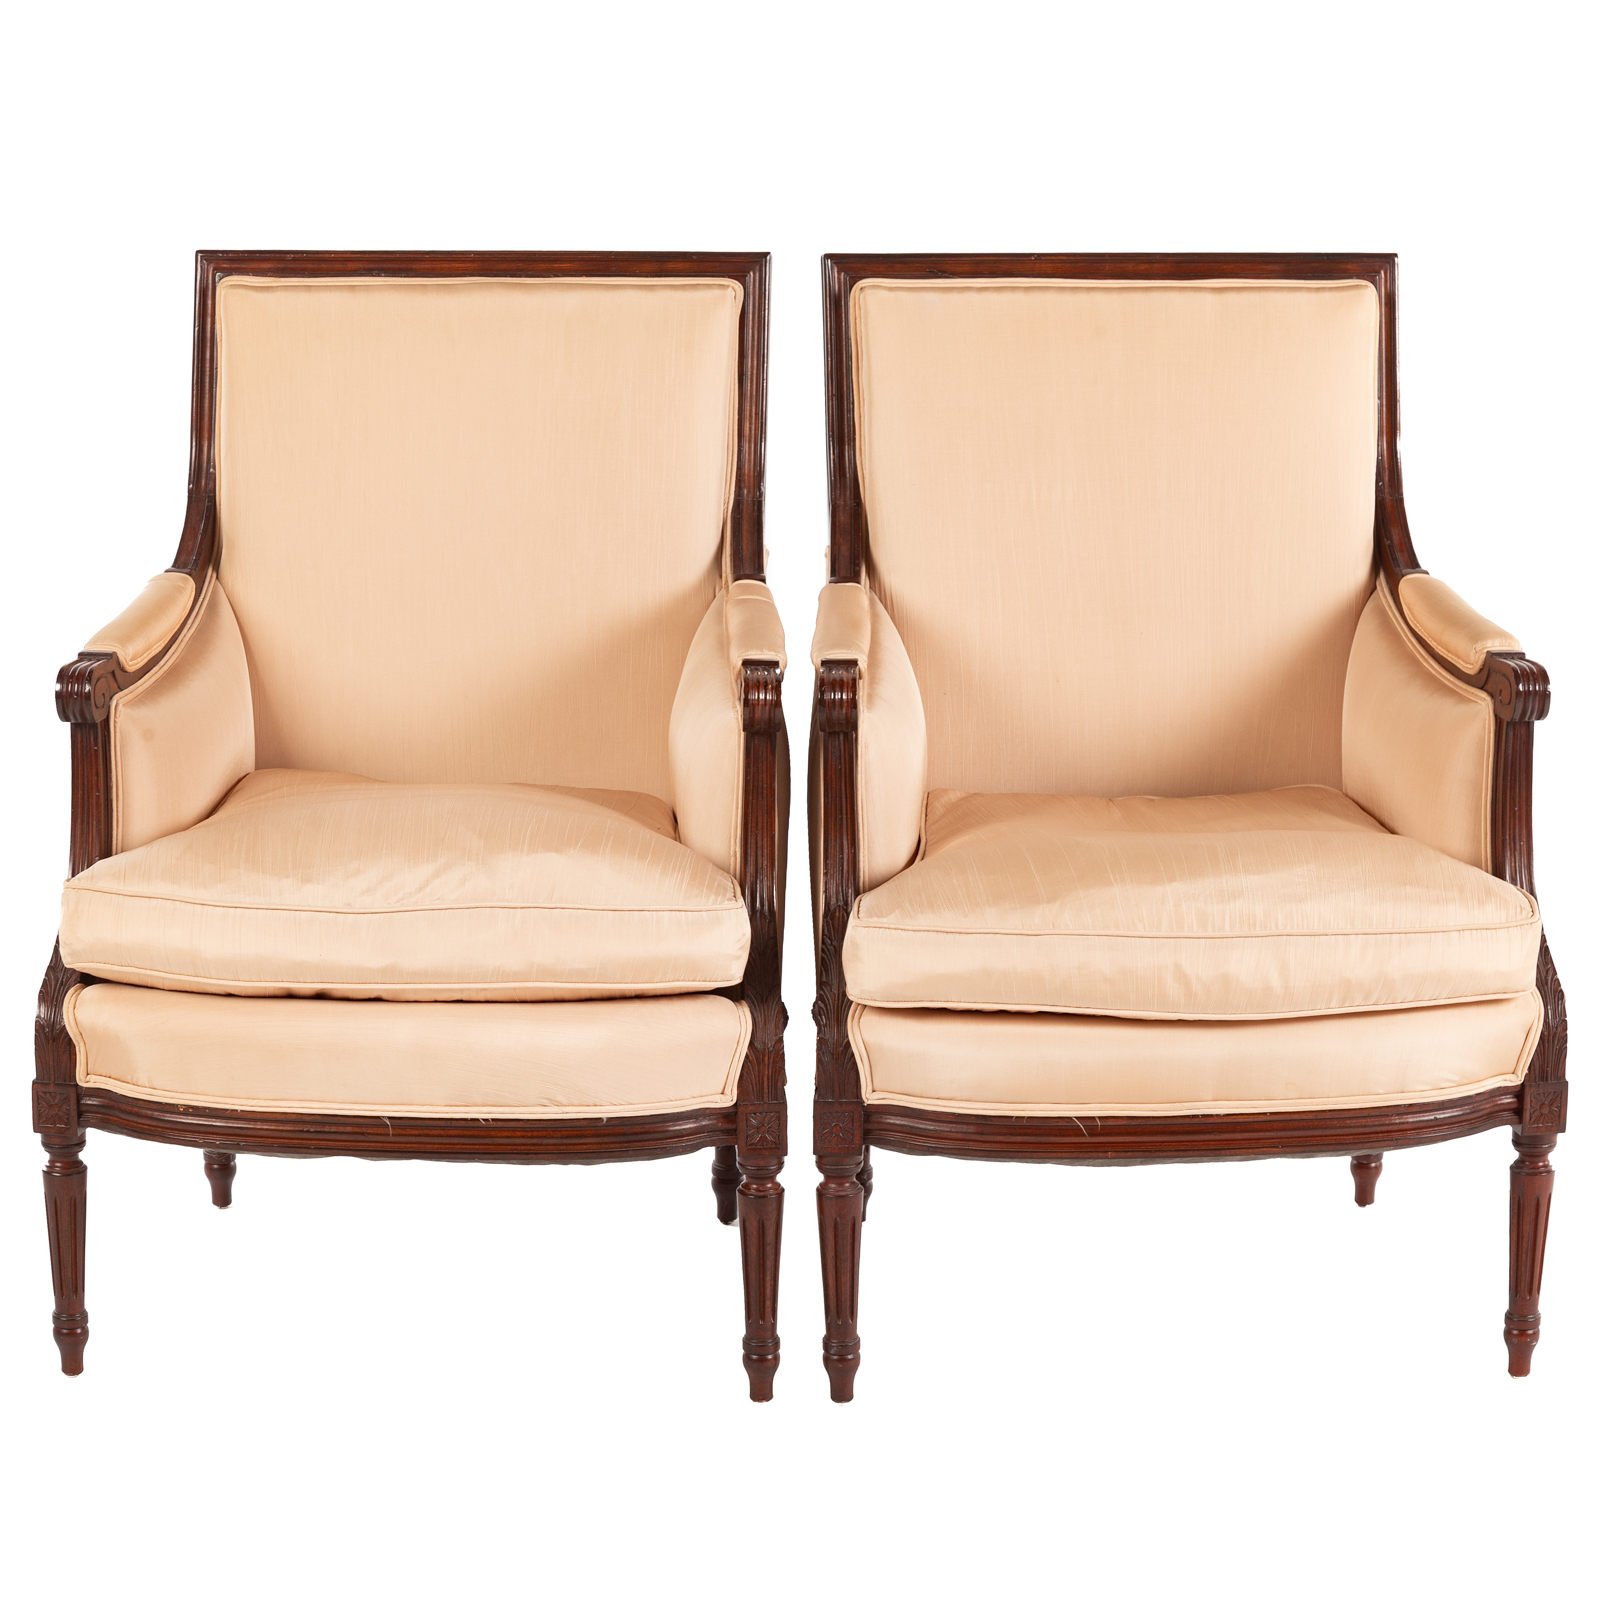 A PAIR OF REGENCY STYLE UPHOLSTERED 369401